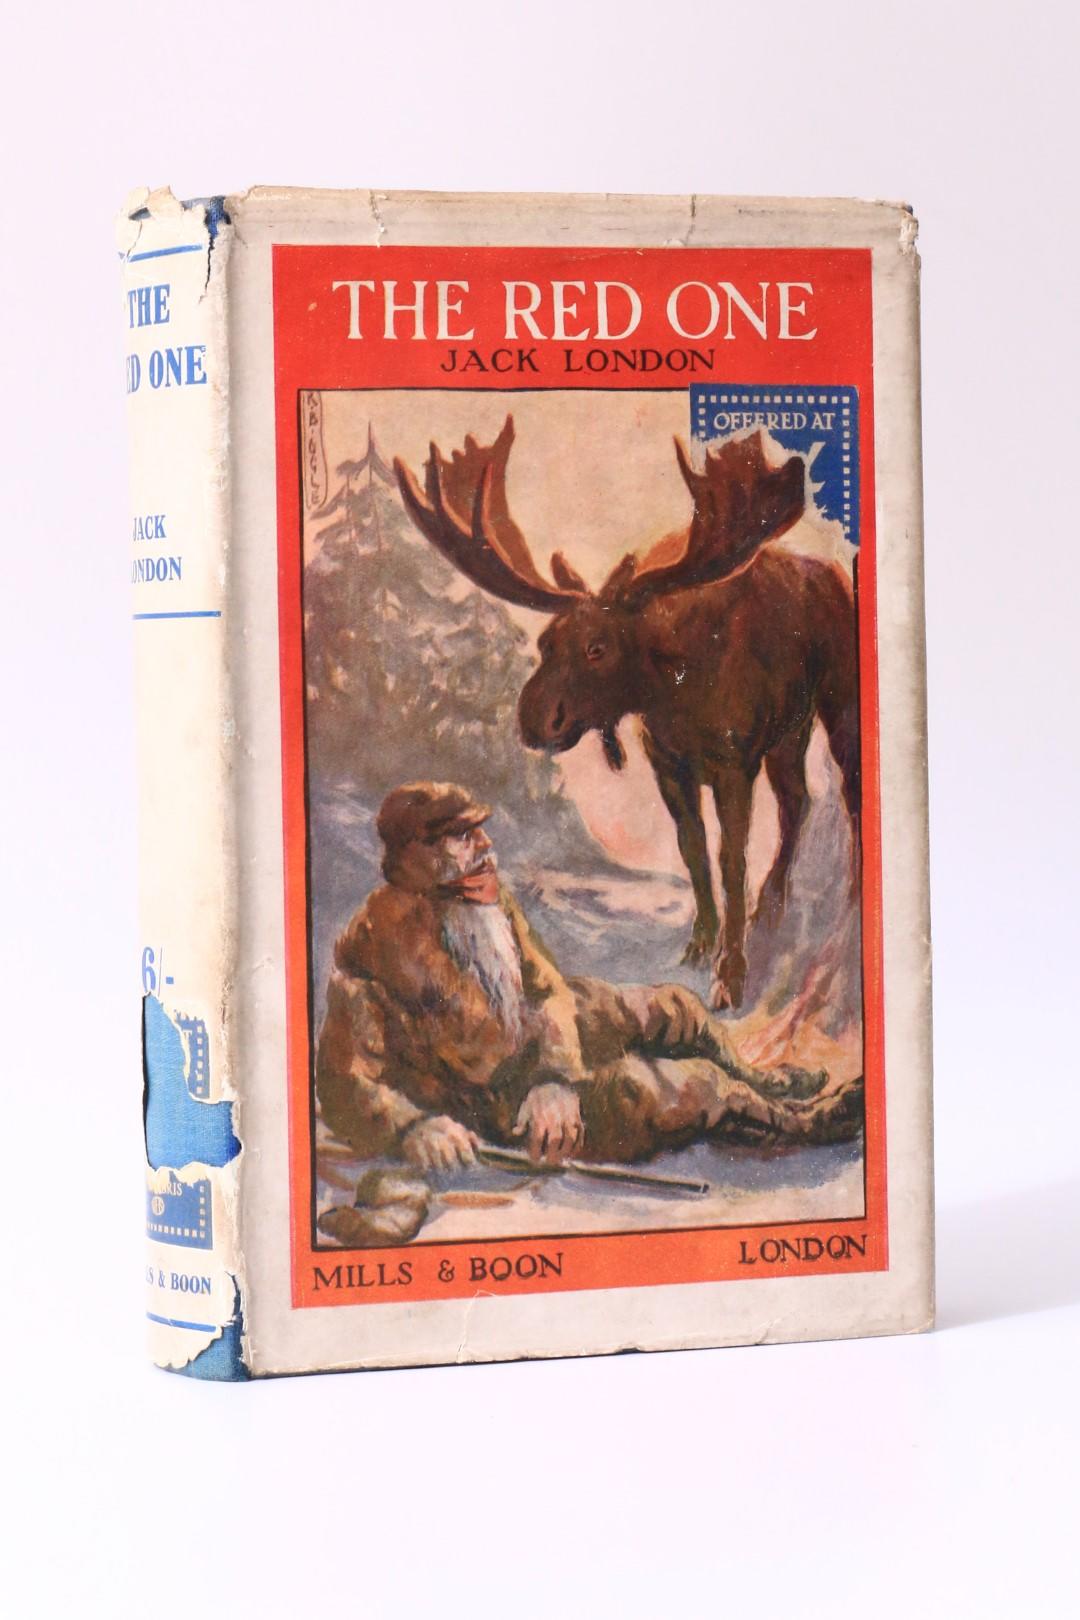 Jack London - The Red One - Mills & Boon, 1919, First Edition.